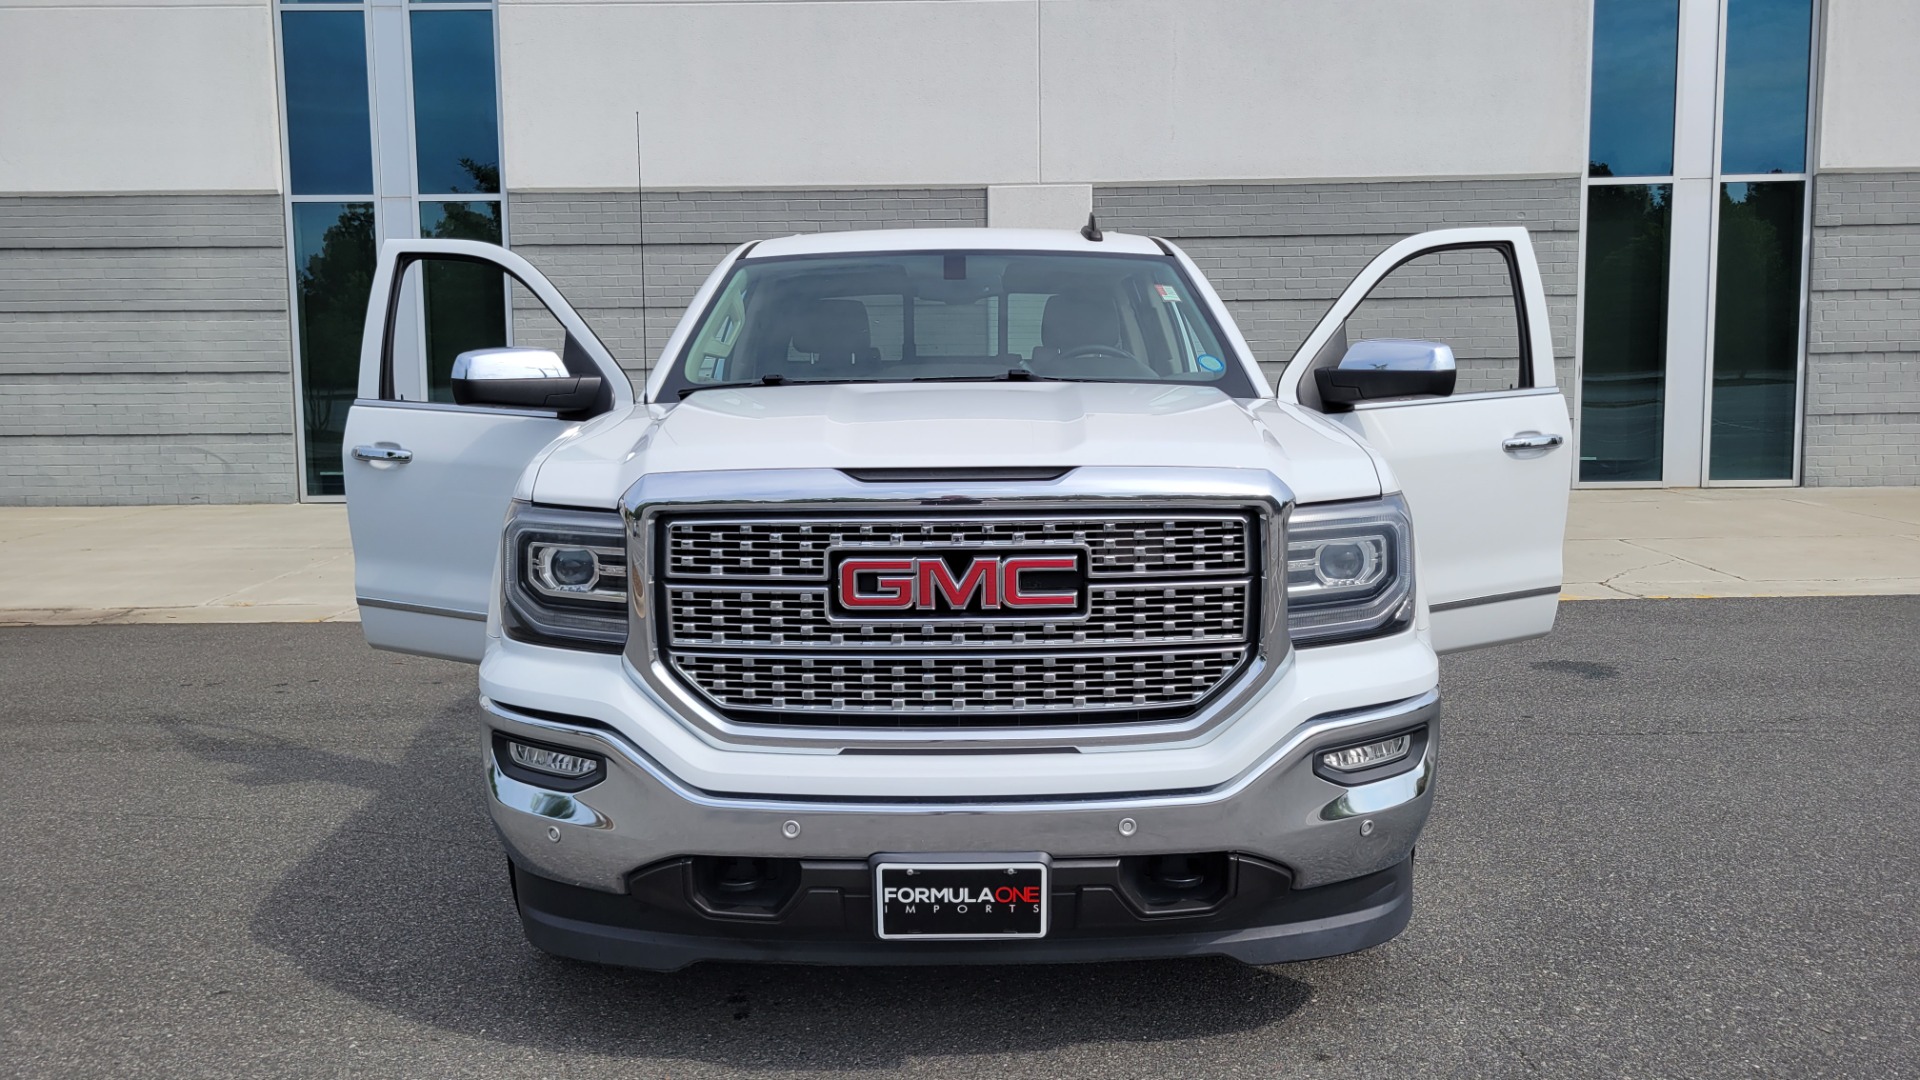 Used 2016 GMC SIERRA 1500 SLT 4X4 Z71 CREWCAB / NAV / BOSE / HTS STS & STRNG WHL / CAMERA for sale $29,695 at Formula Imports in Charlotte NC 28227 27